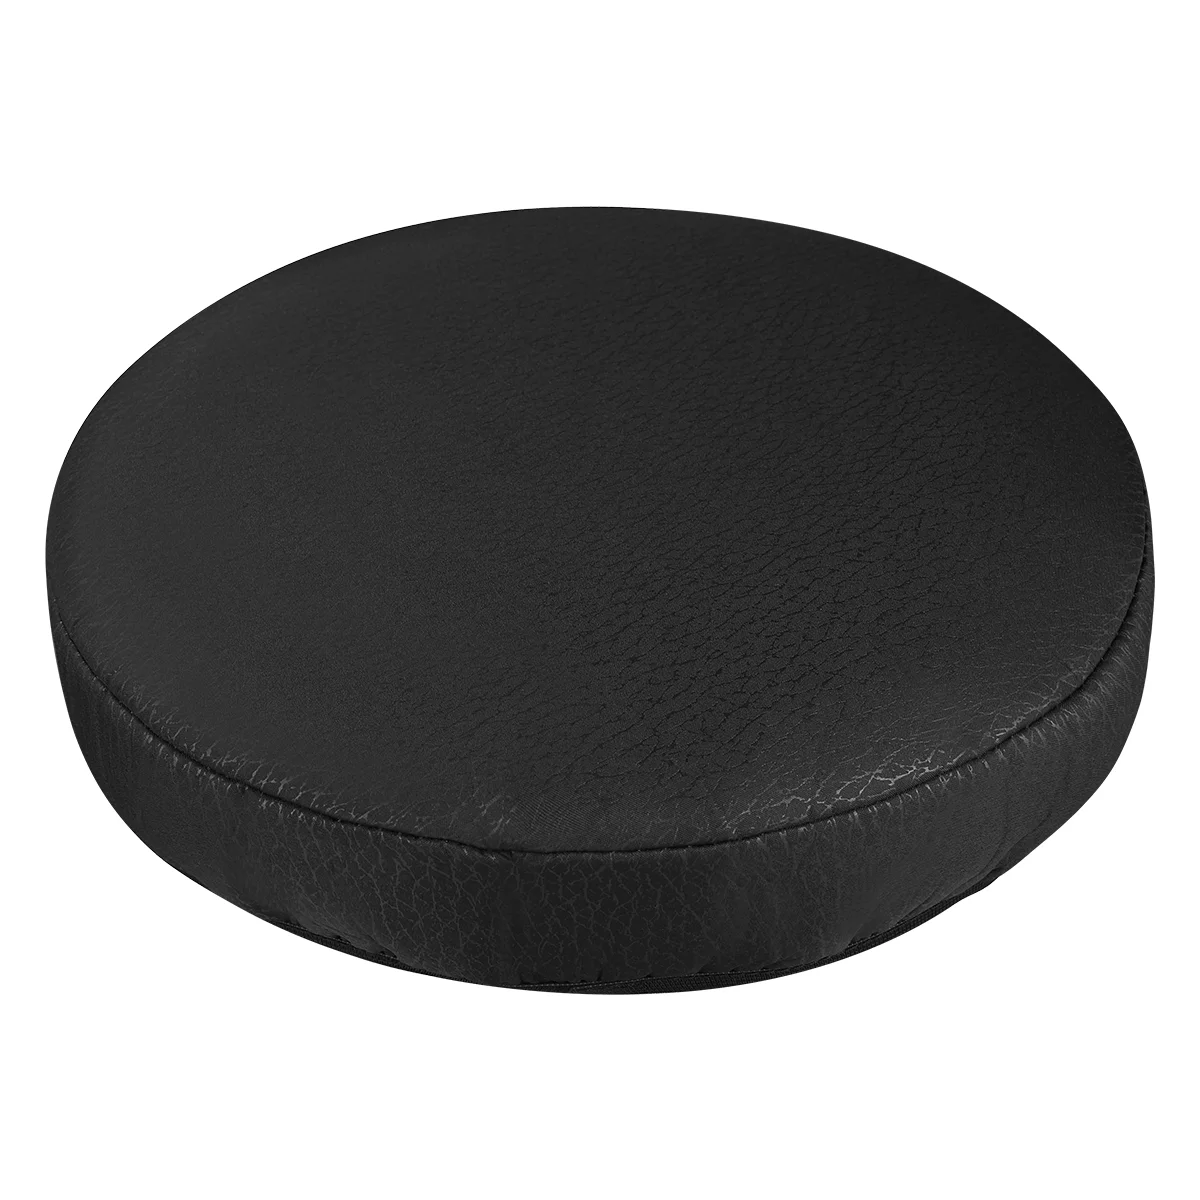 

VORCOOL 1PC 33cm Thick Elastic Barstool Seat Cushion Cover Cotton Stool Cover Round Chair Protector (Black)